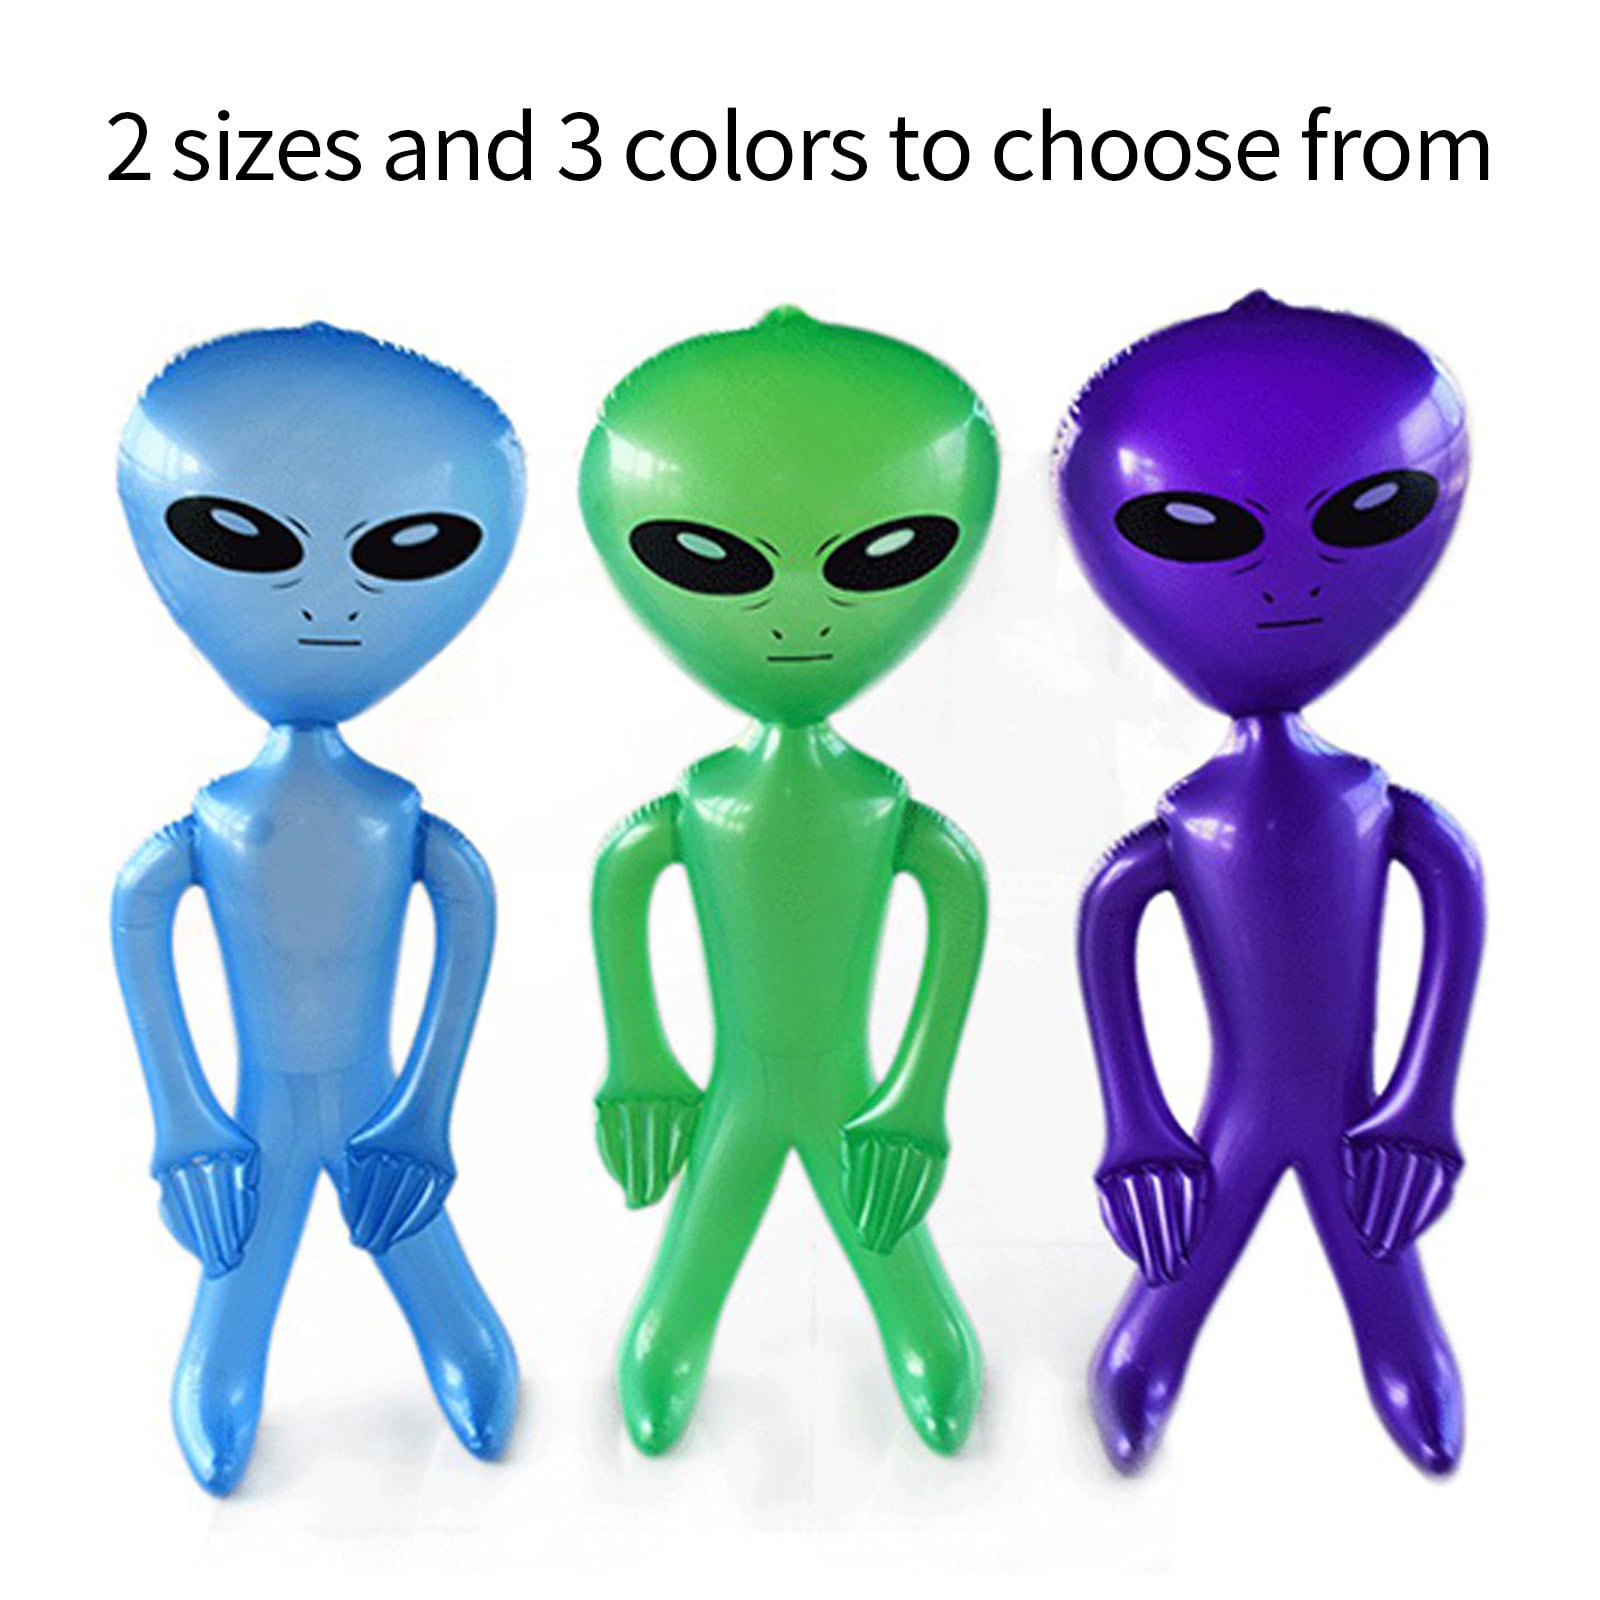 9 NEW INFLATABLE SPACE ALIENS GREEN PURPLE & BLUE 36"  INFLATE ALIEN HALLOWEEN 